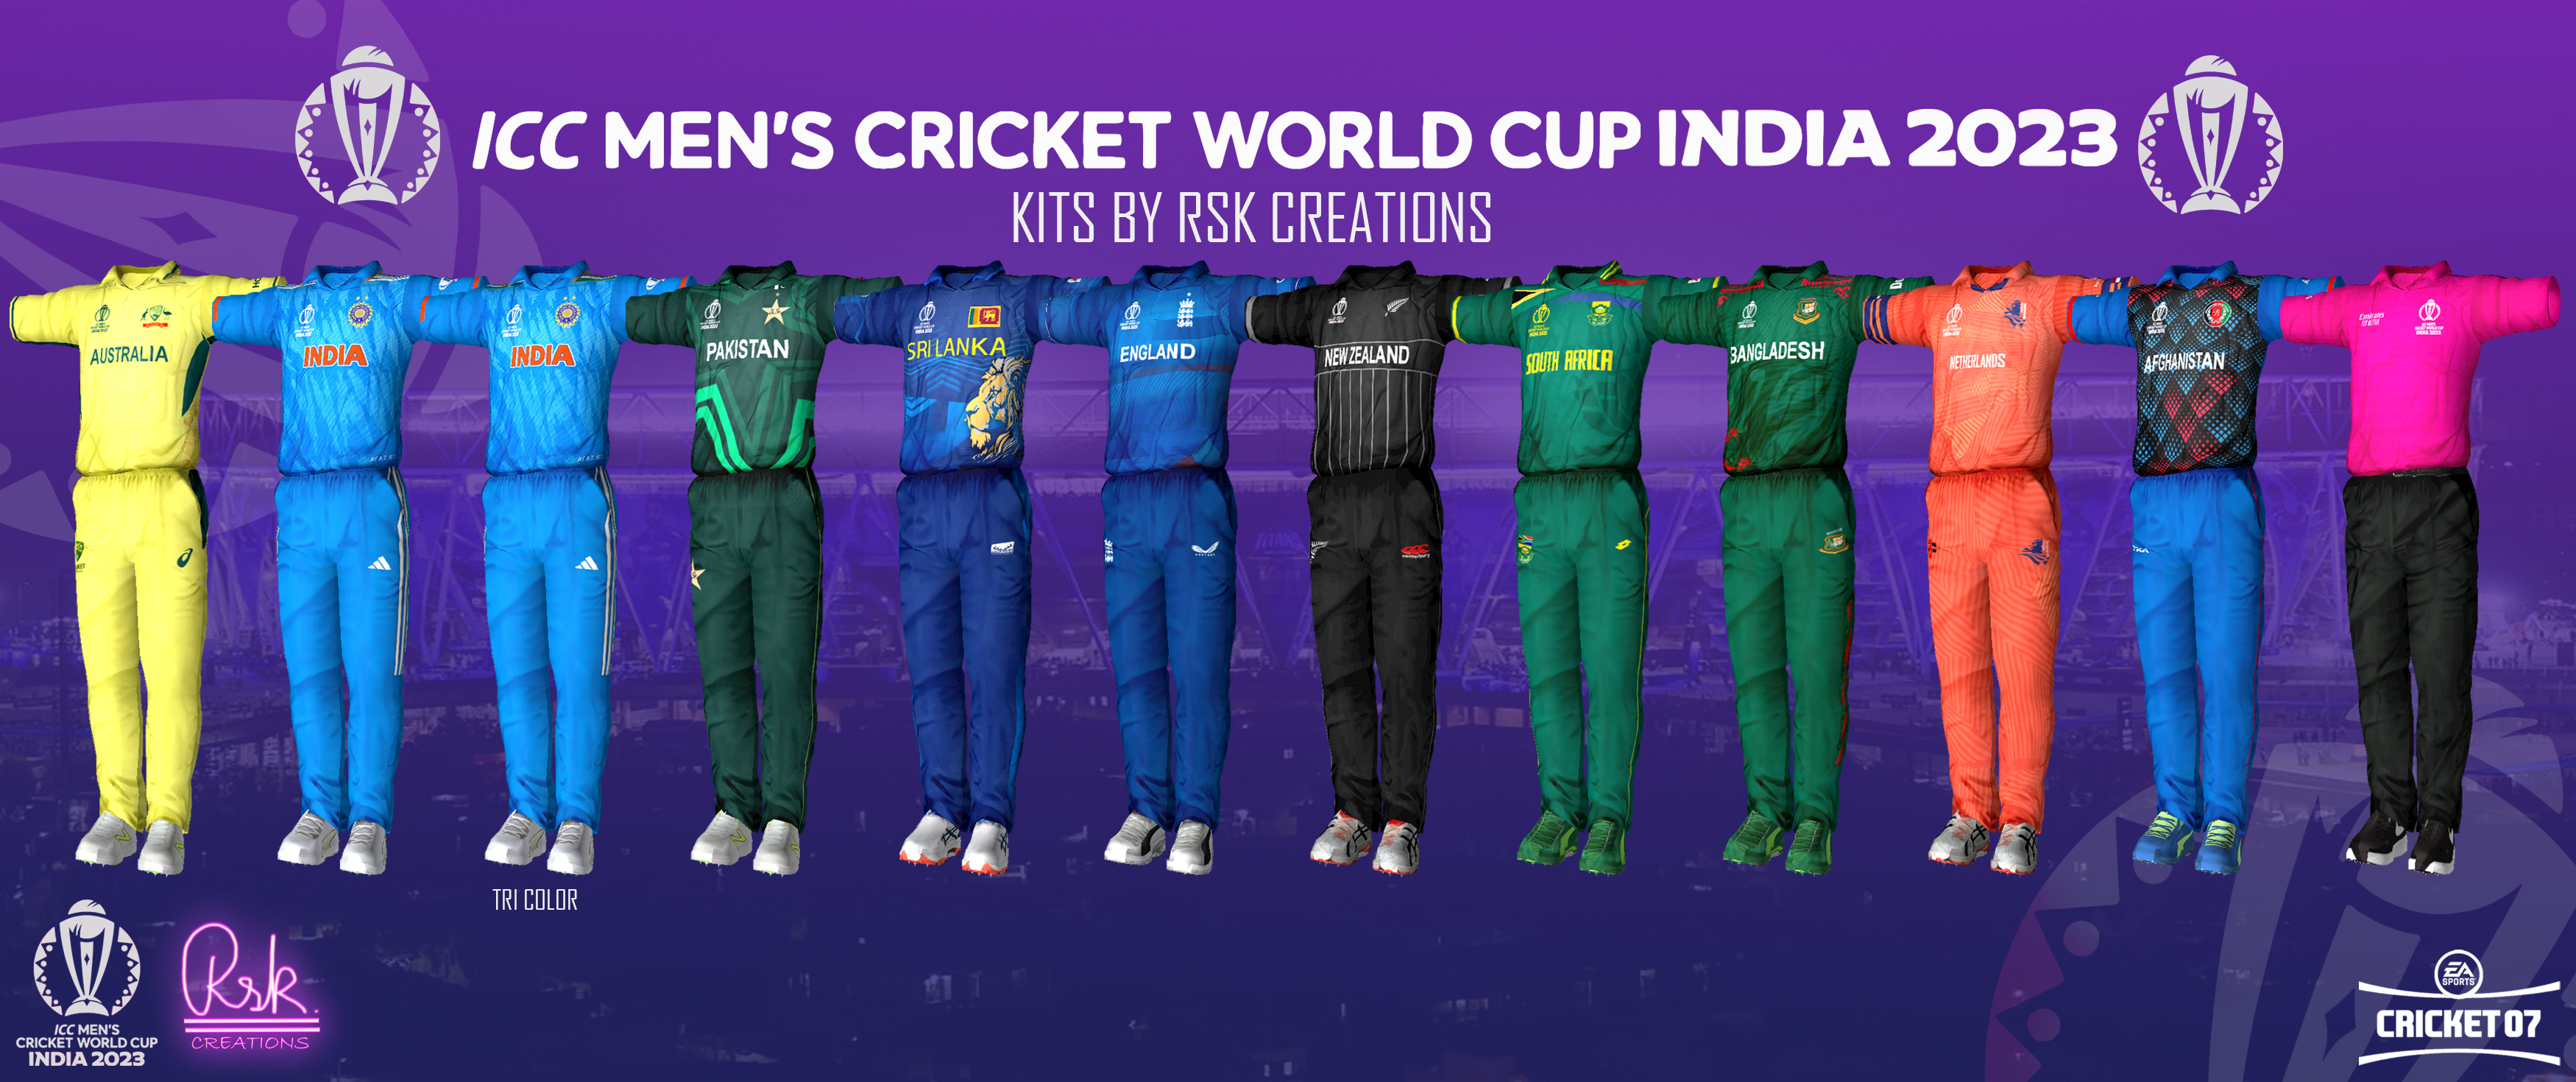 ICC World Cup 2023 HD Kits for EA Cricket 07